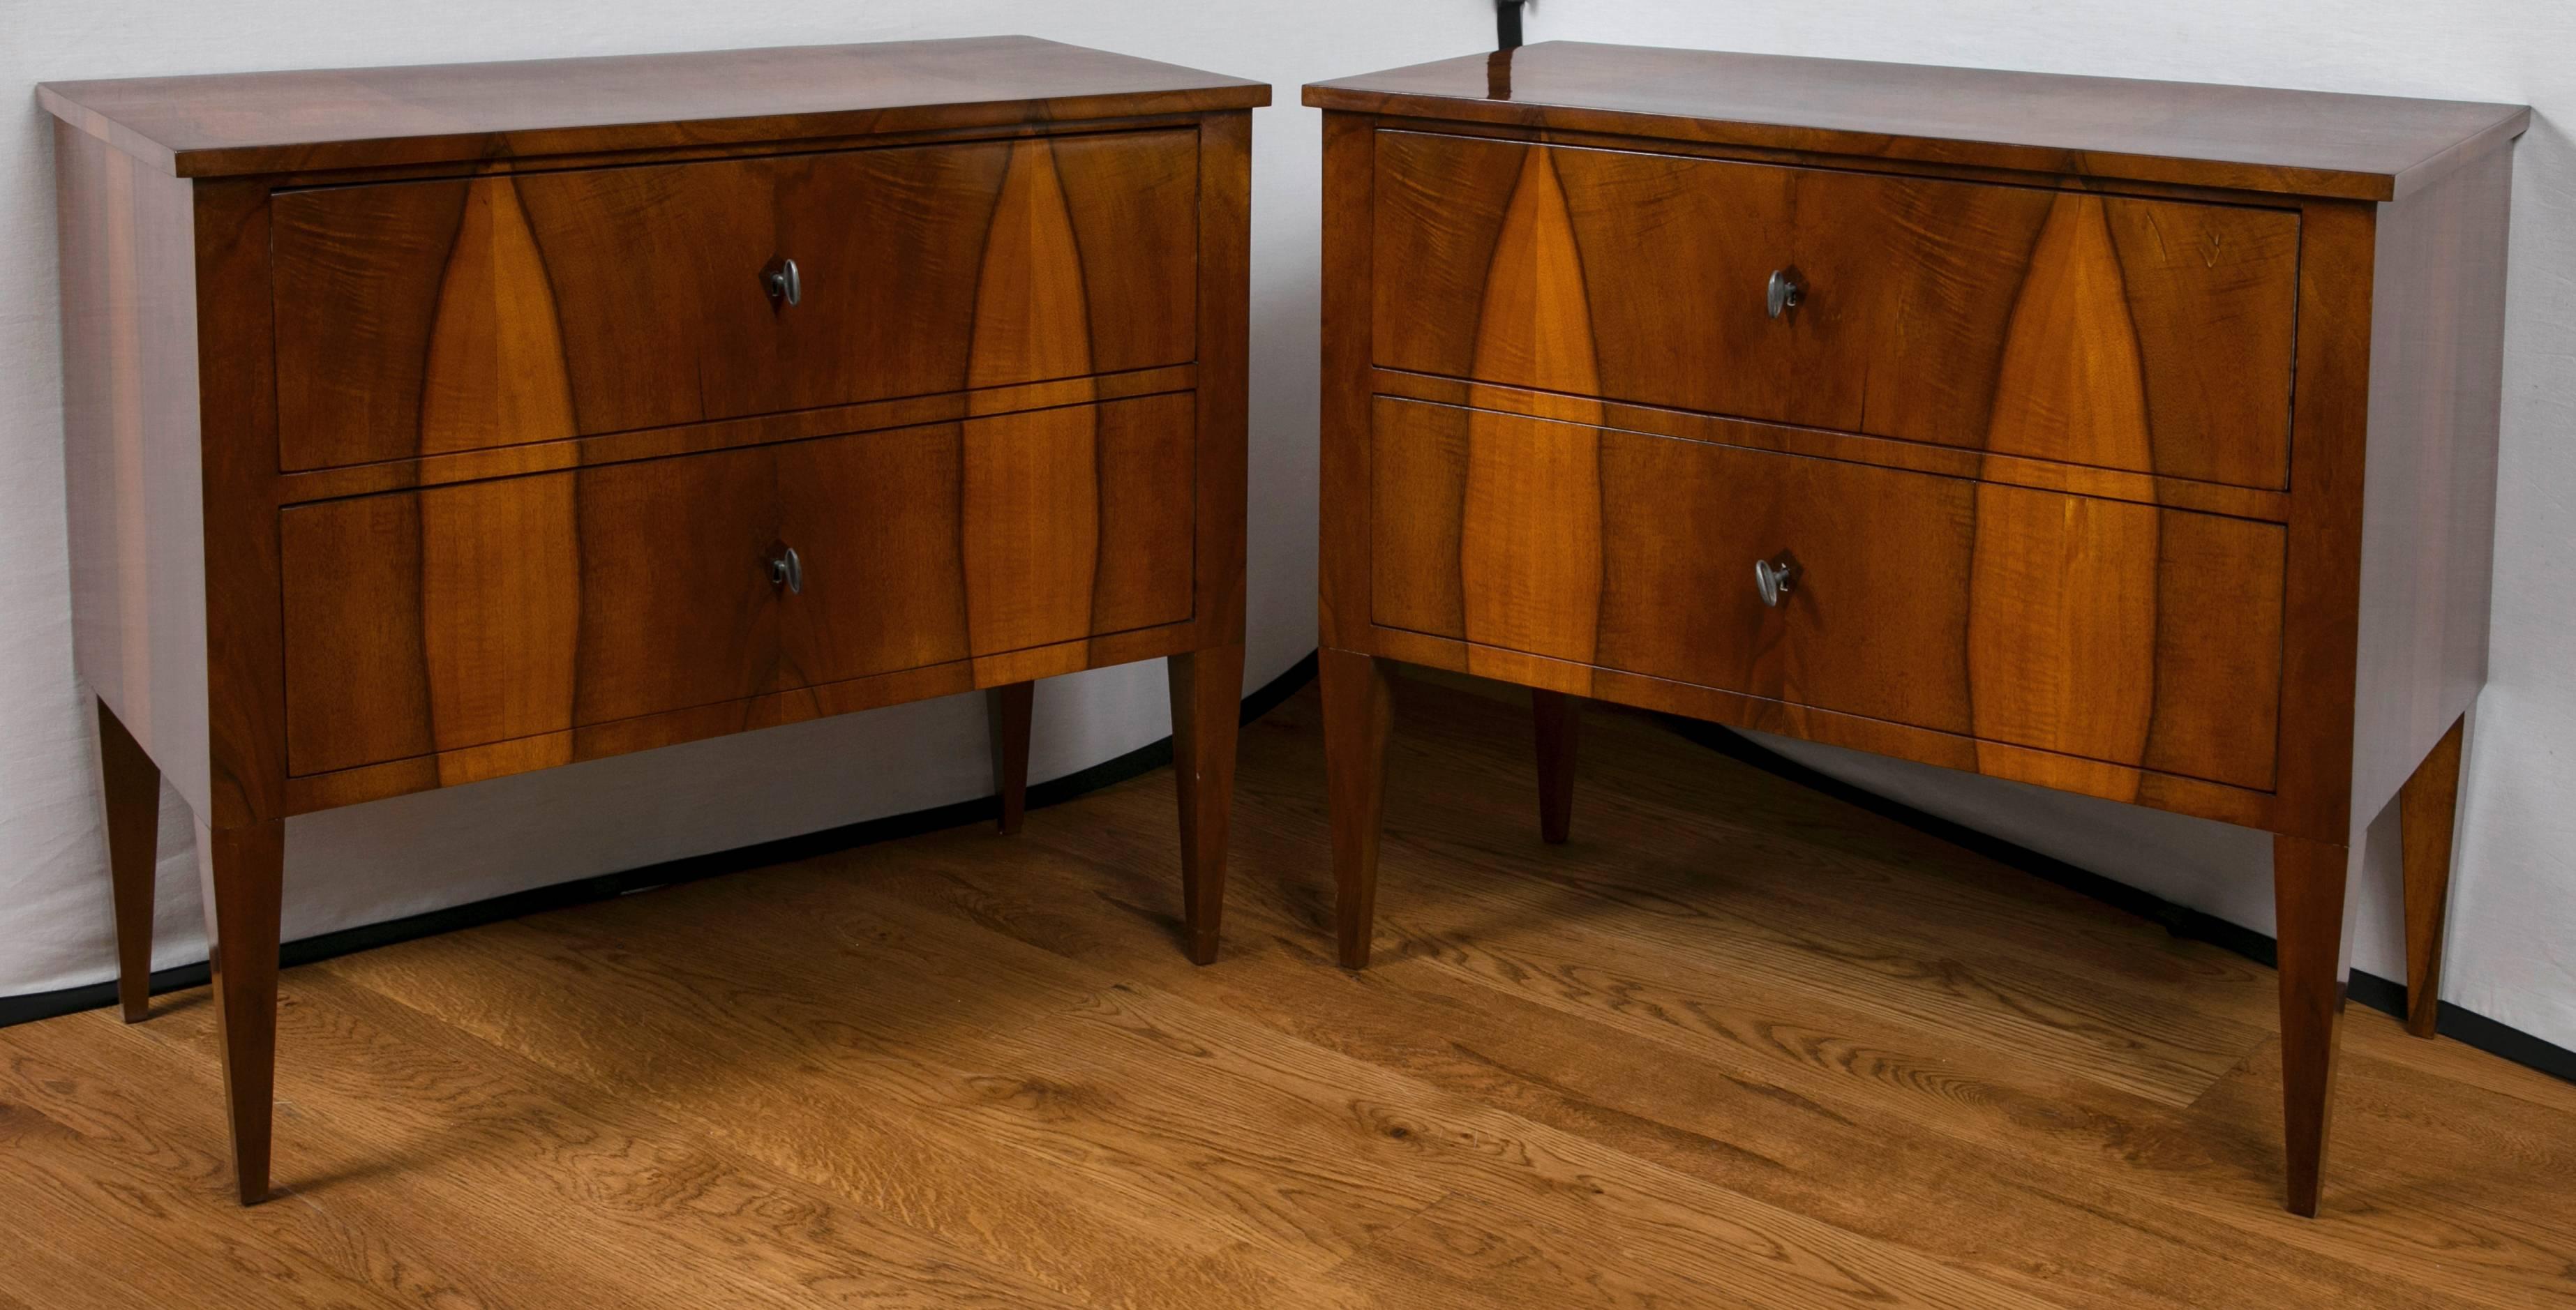 Pair of Biedermeier style chests comprised of two drawers on high tapered and straight legs with inlaid diamond shaped key holes, primary wood in a beautiful book matched walnut veneer on pine, refurbished and French polished, circa 1860.